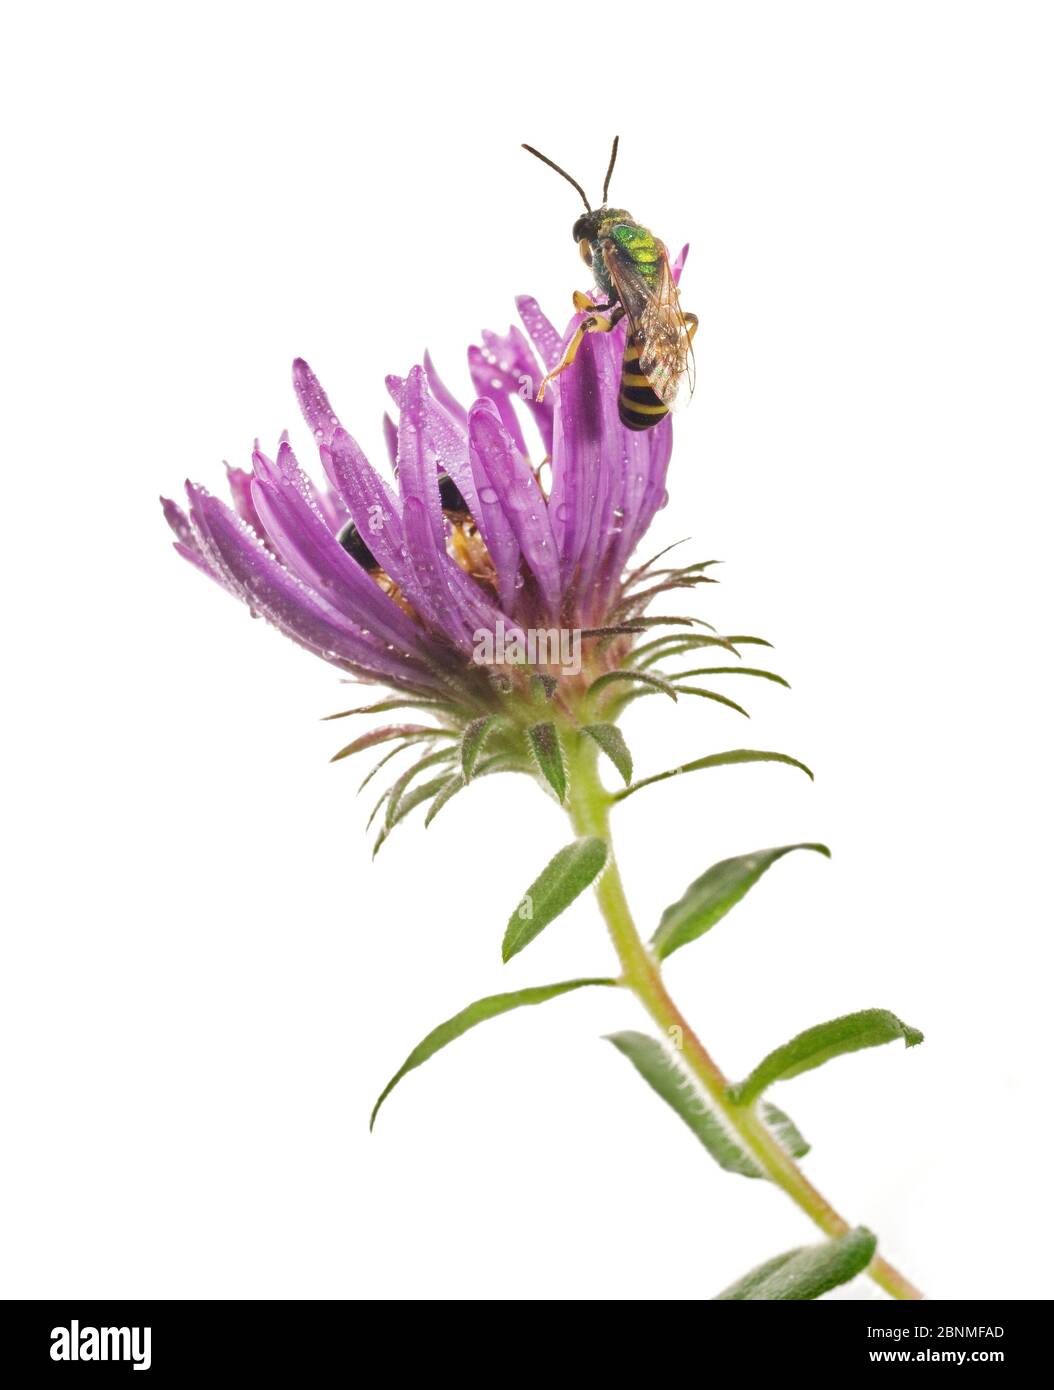 Dew-covered male Metallic green bee (Agapostemon splendens) begins to move after sleeping on an Aster overnight, South Carolina, USA, August. Meetyour Stock Photo